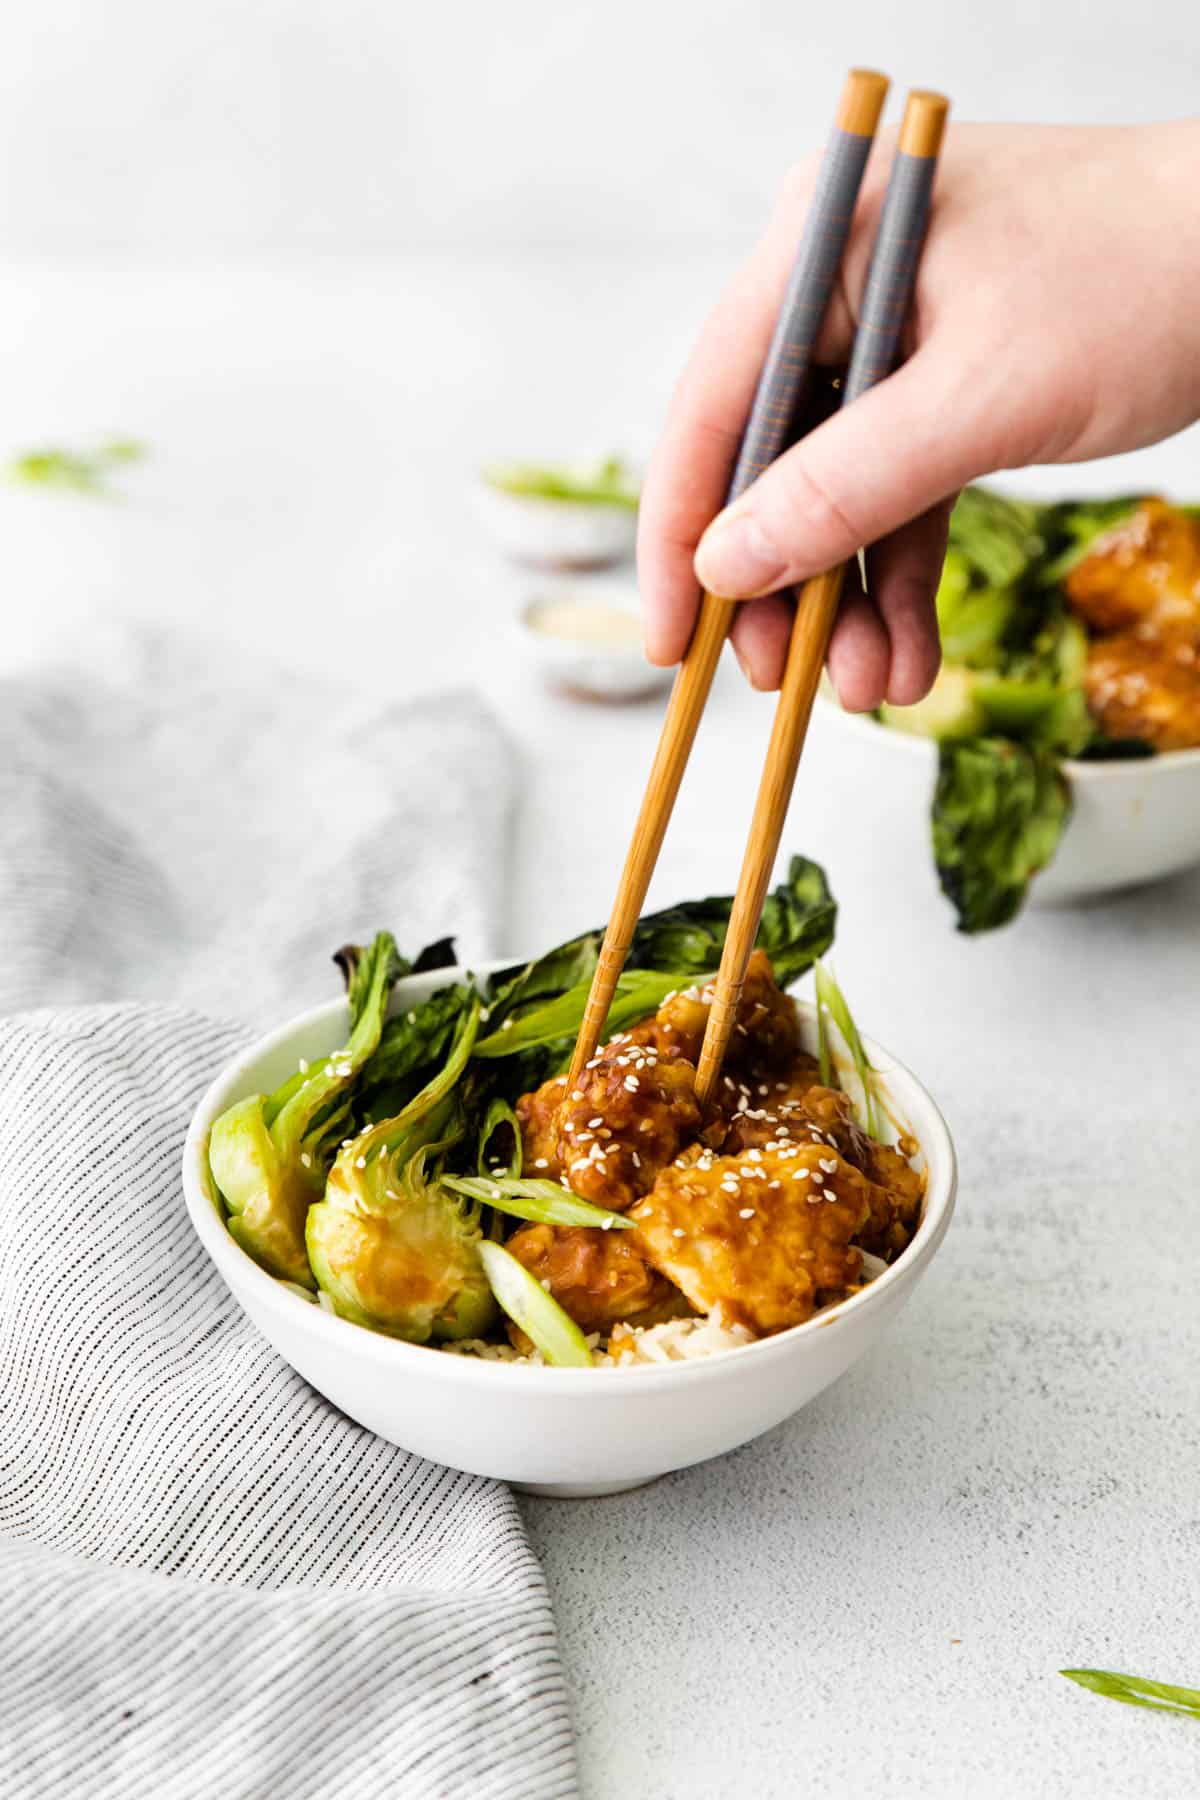 A hand using chopsticks to pick up sticky sesame chicken from a bowl.